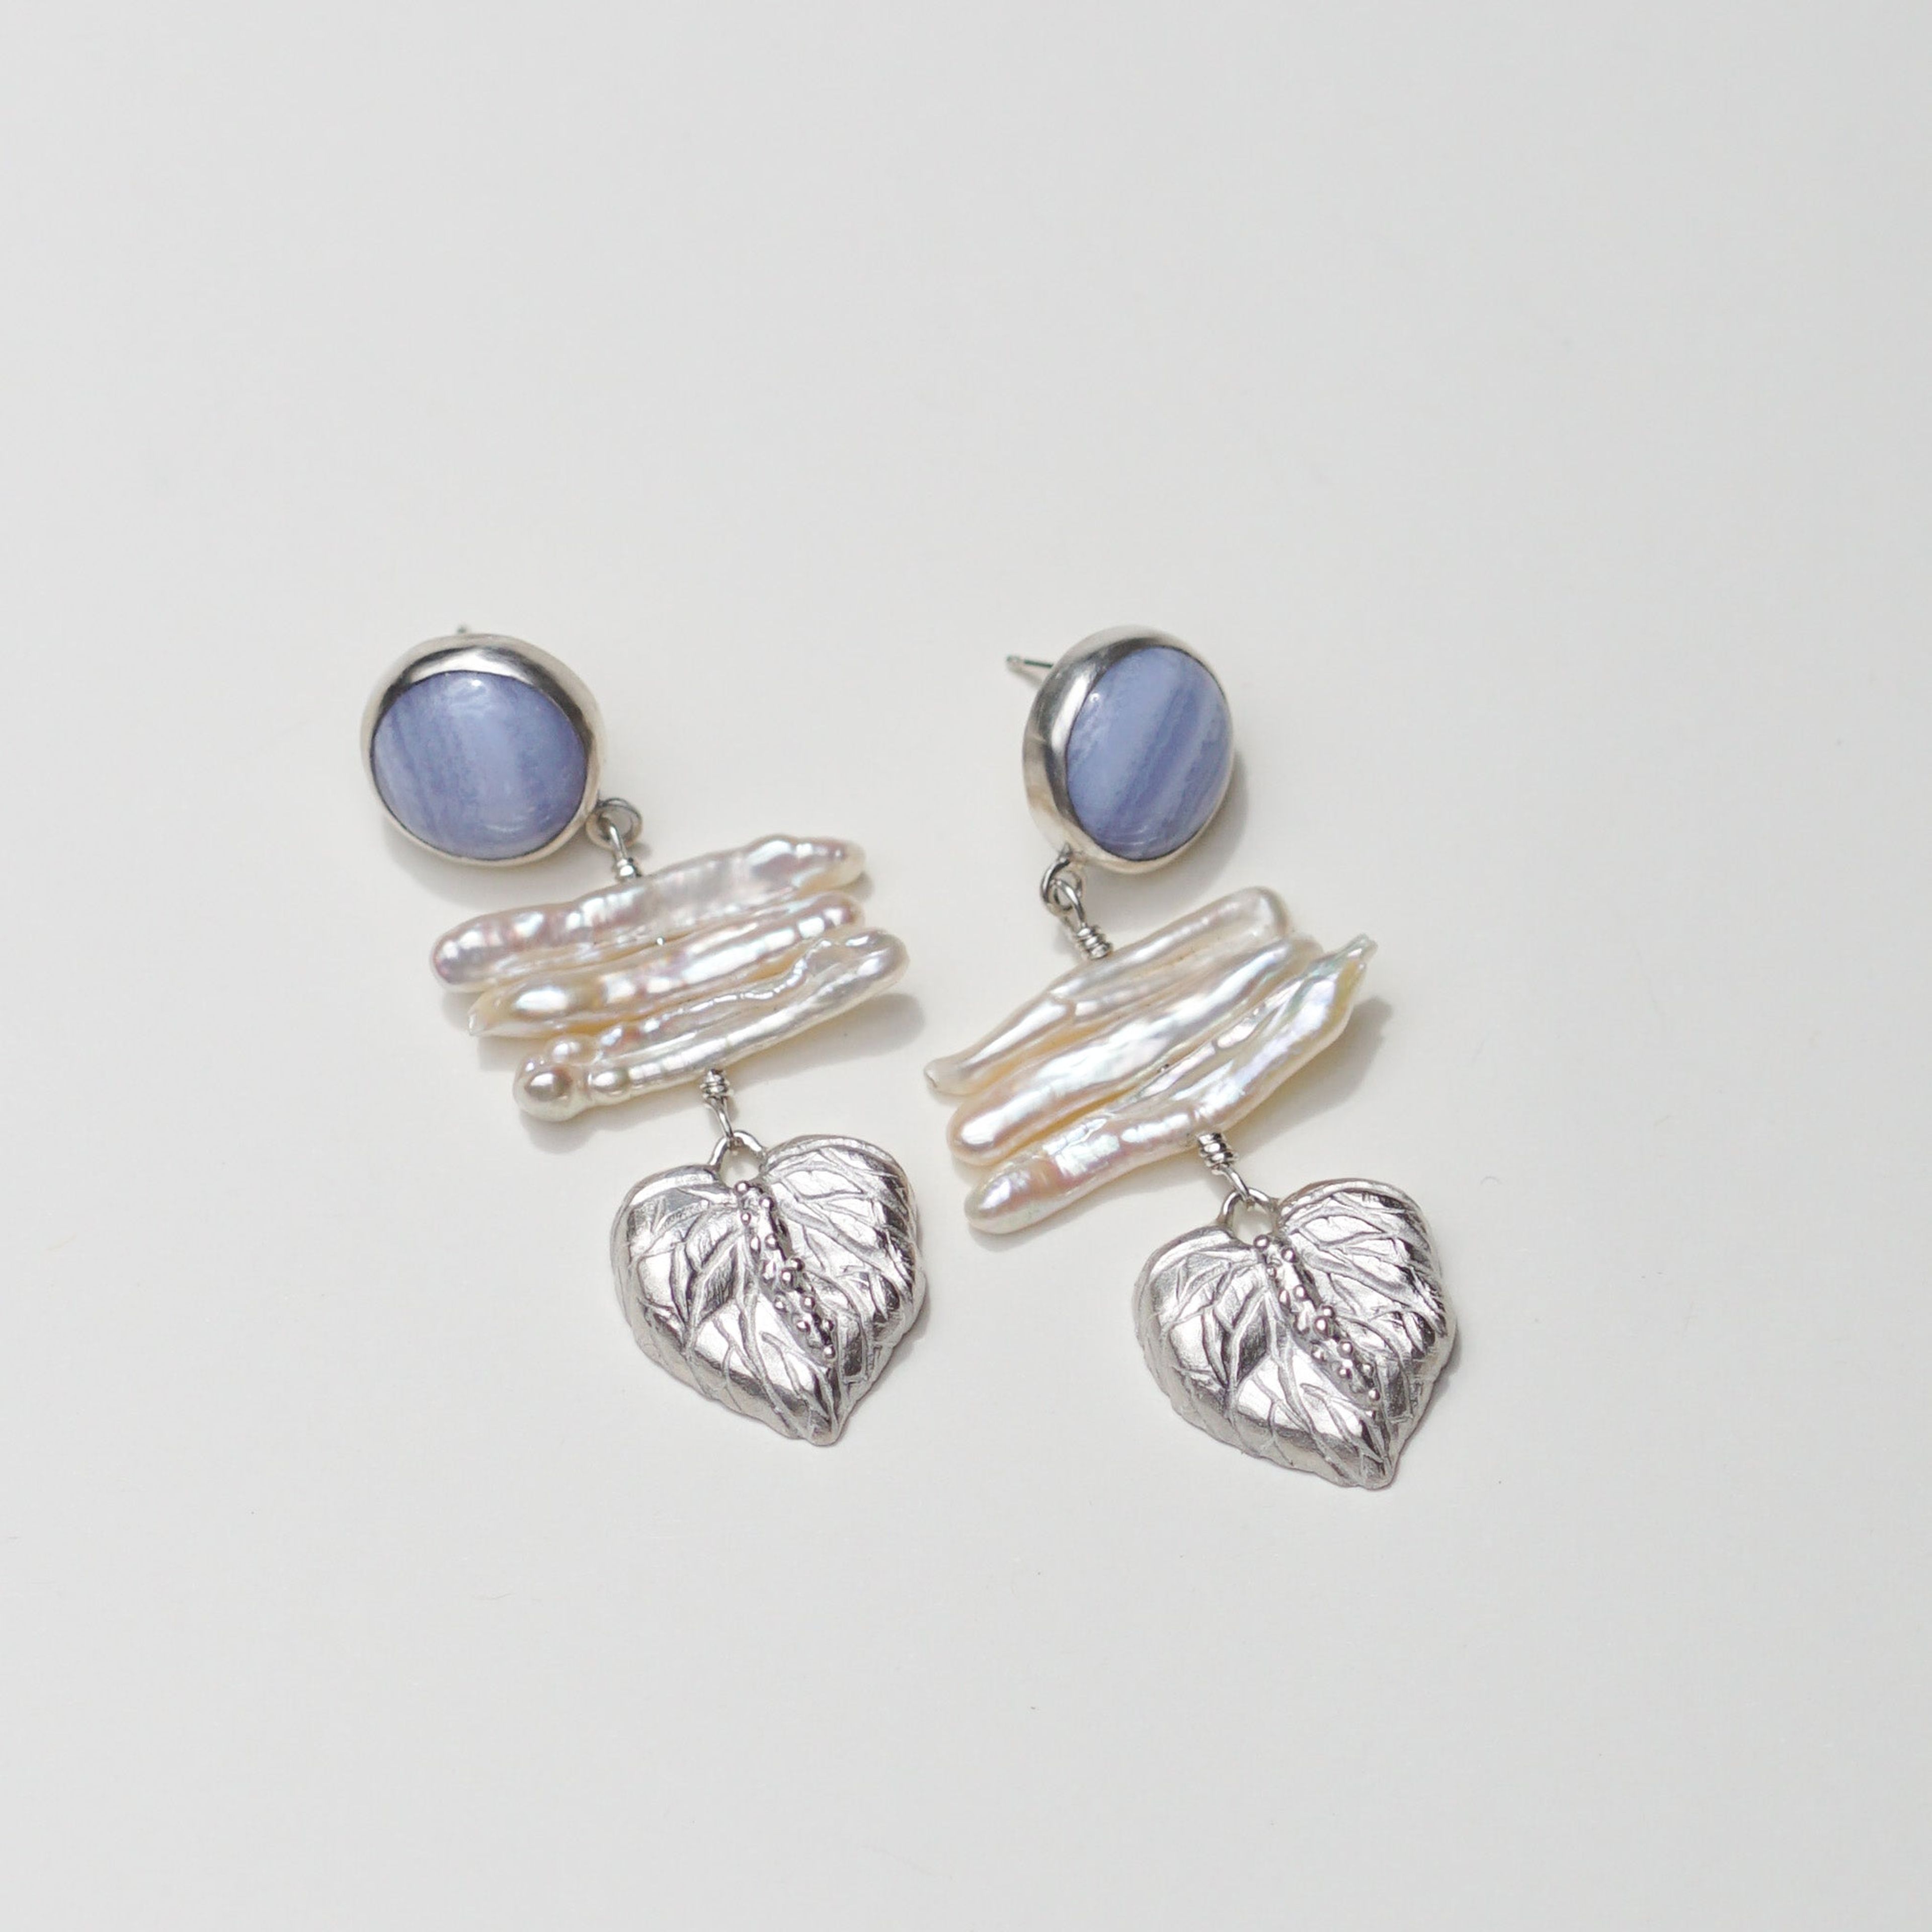 Blue Lace Agate & Pearl Anthurium Earrings